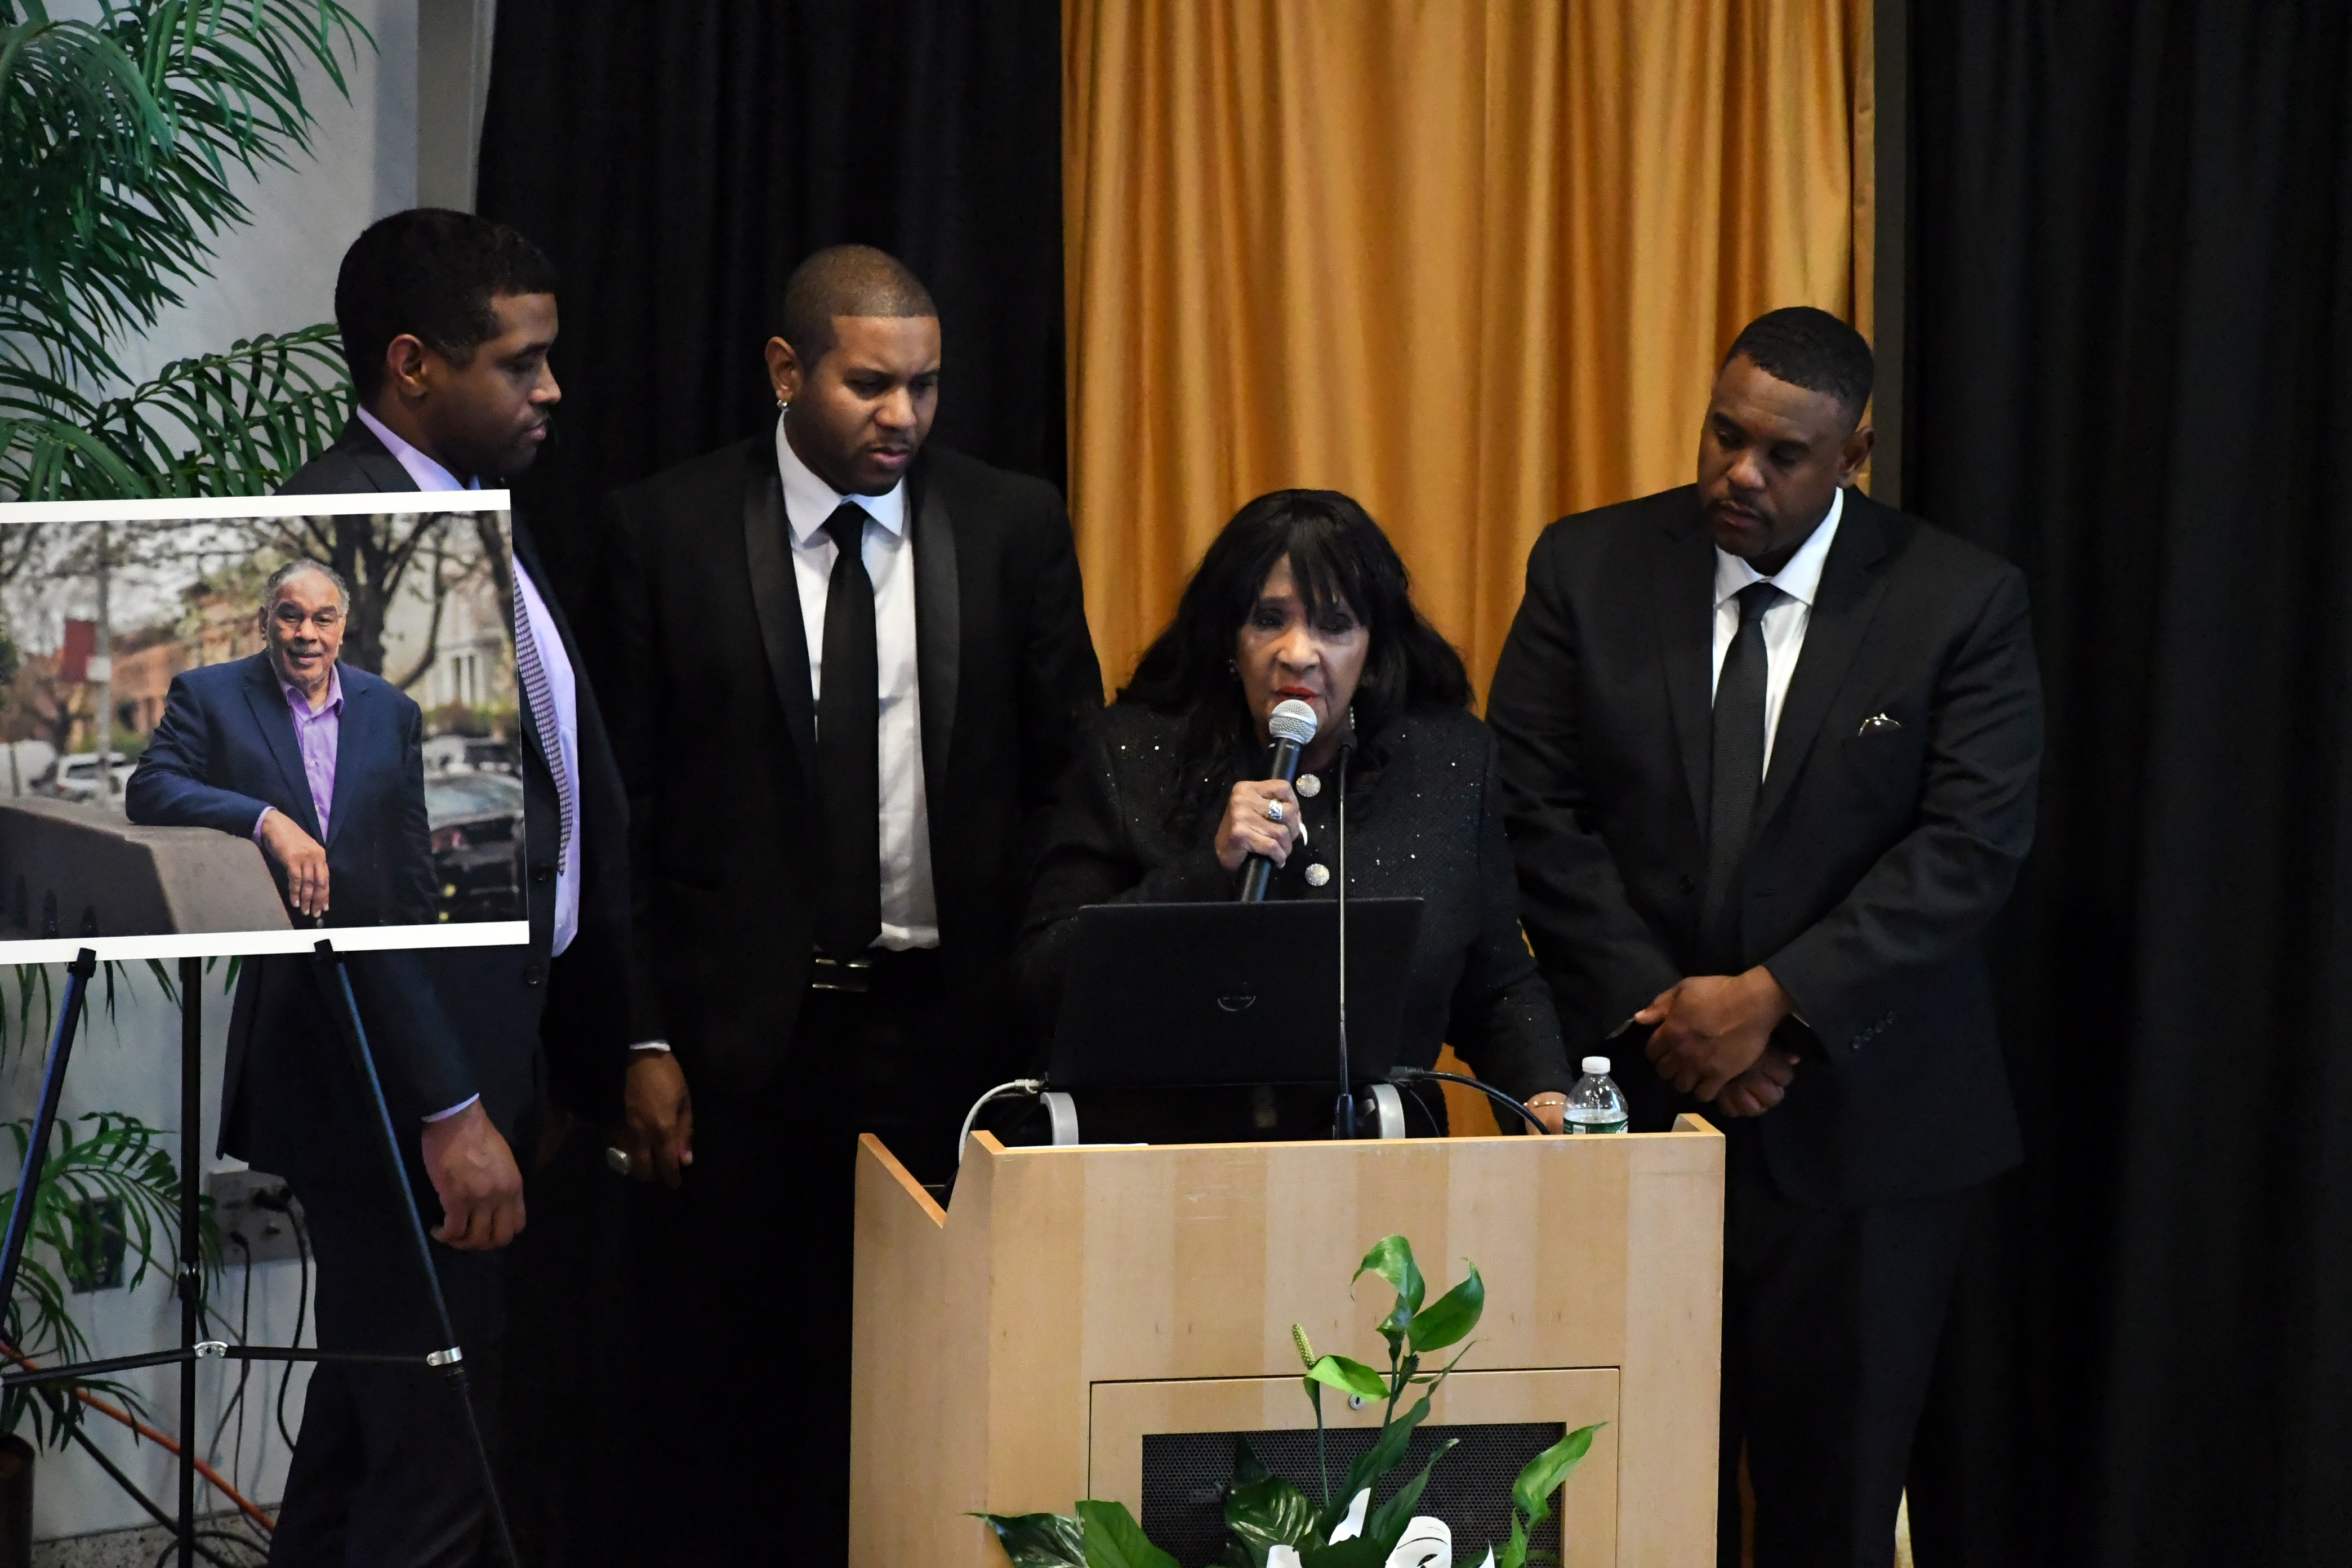 Dr. Evelyn W. Castro, the Senior Advisor to the President for Community Engagement at Medgar Evers College, has the Flateau family by her side as she spoke of her relationship with Dr. Flateau. (Photo by Nick Masuda/MEC)